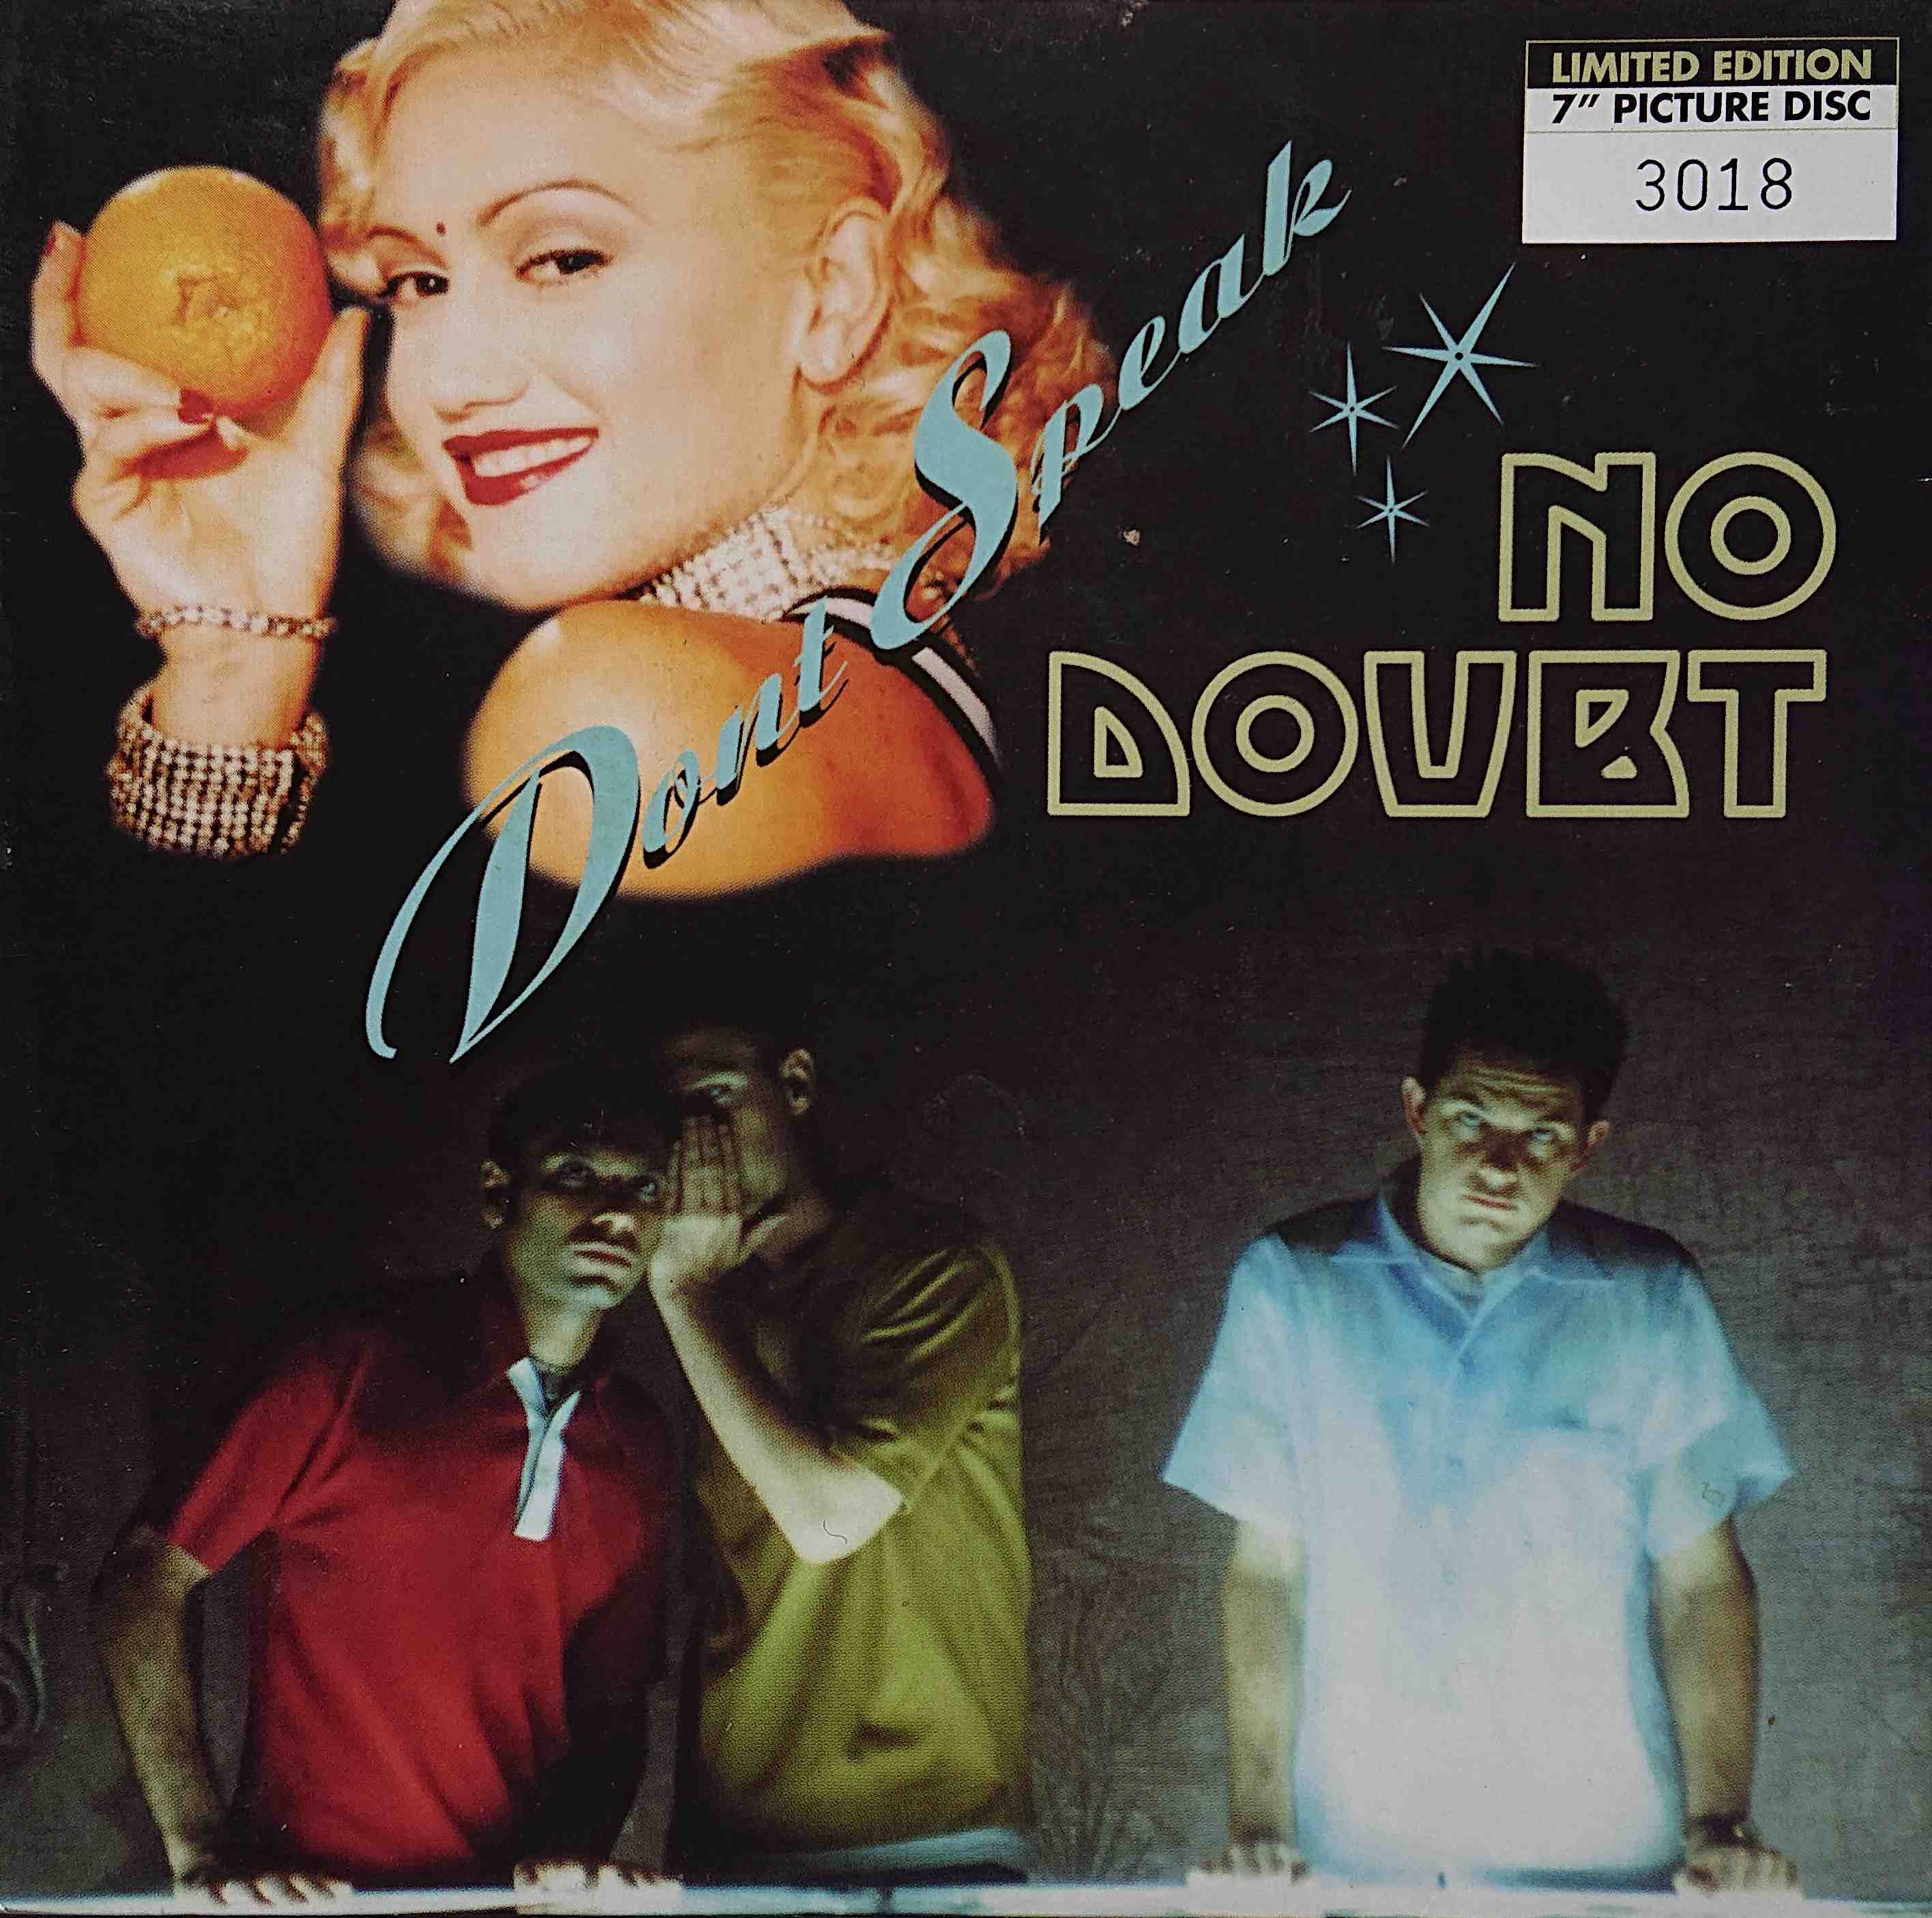 Picture of Don't speak by artist No Doubt 